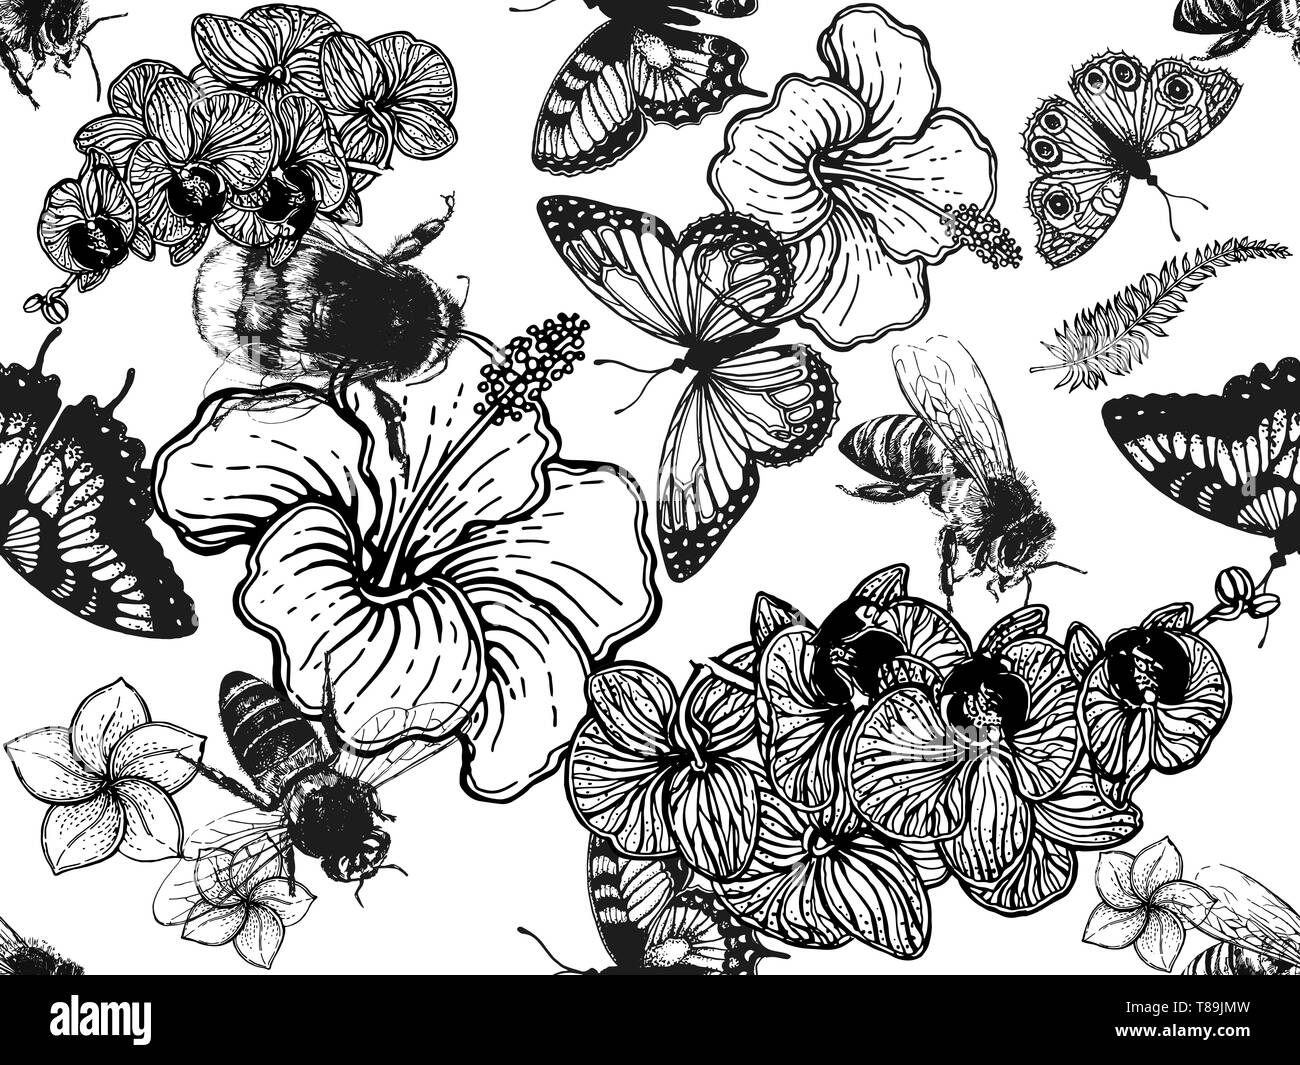 Seamless pattern of hand drawn sketch style insects and tropical flowers isolated on white background. Vector illustration. Stock Vector